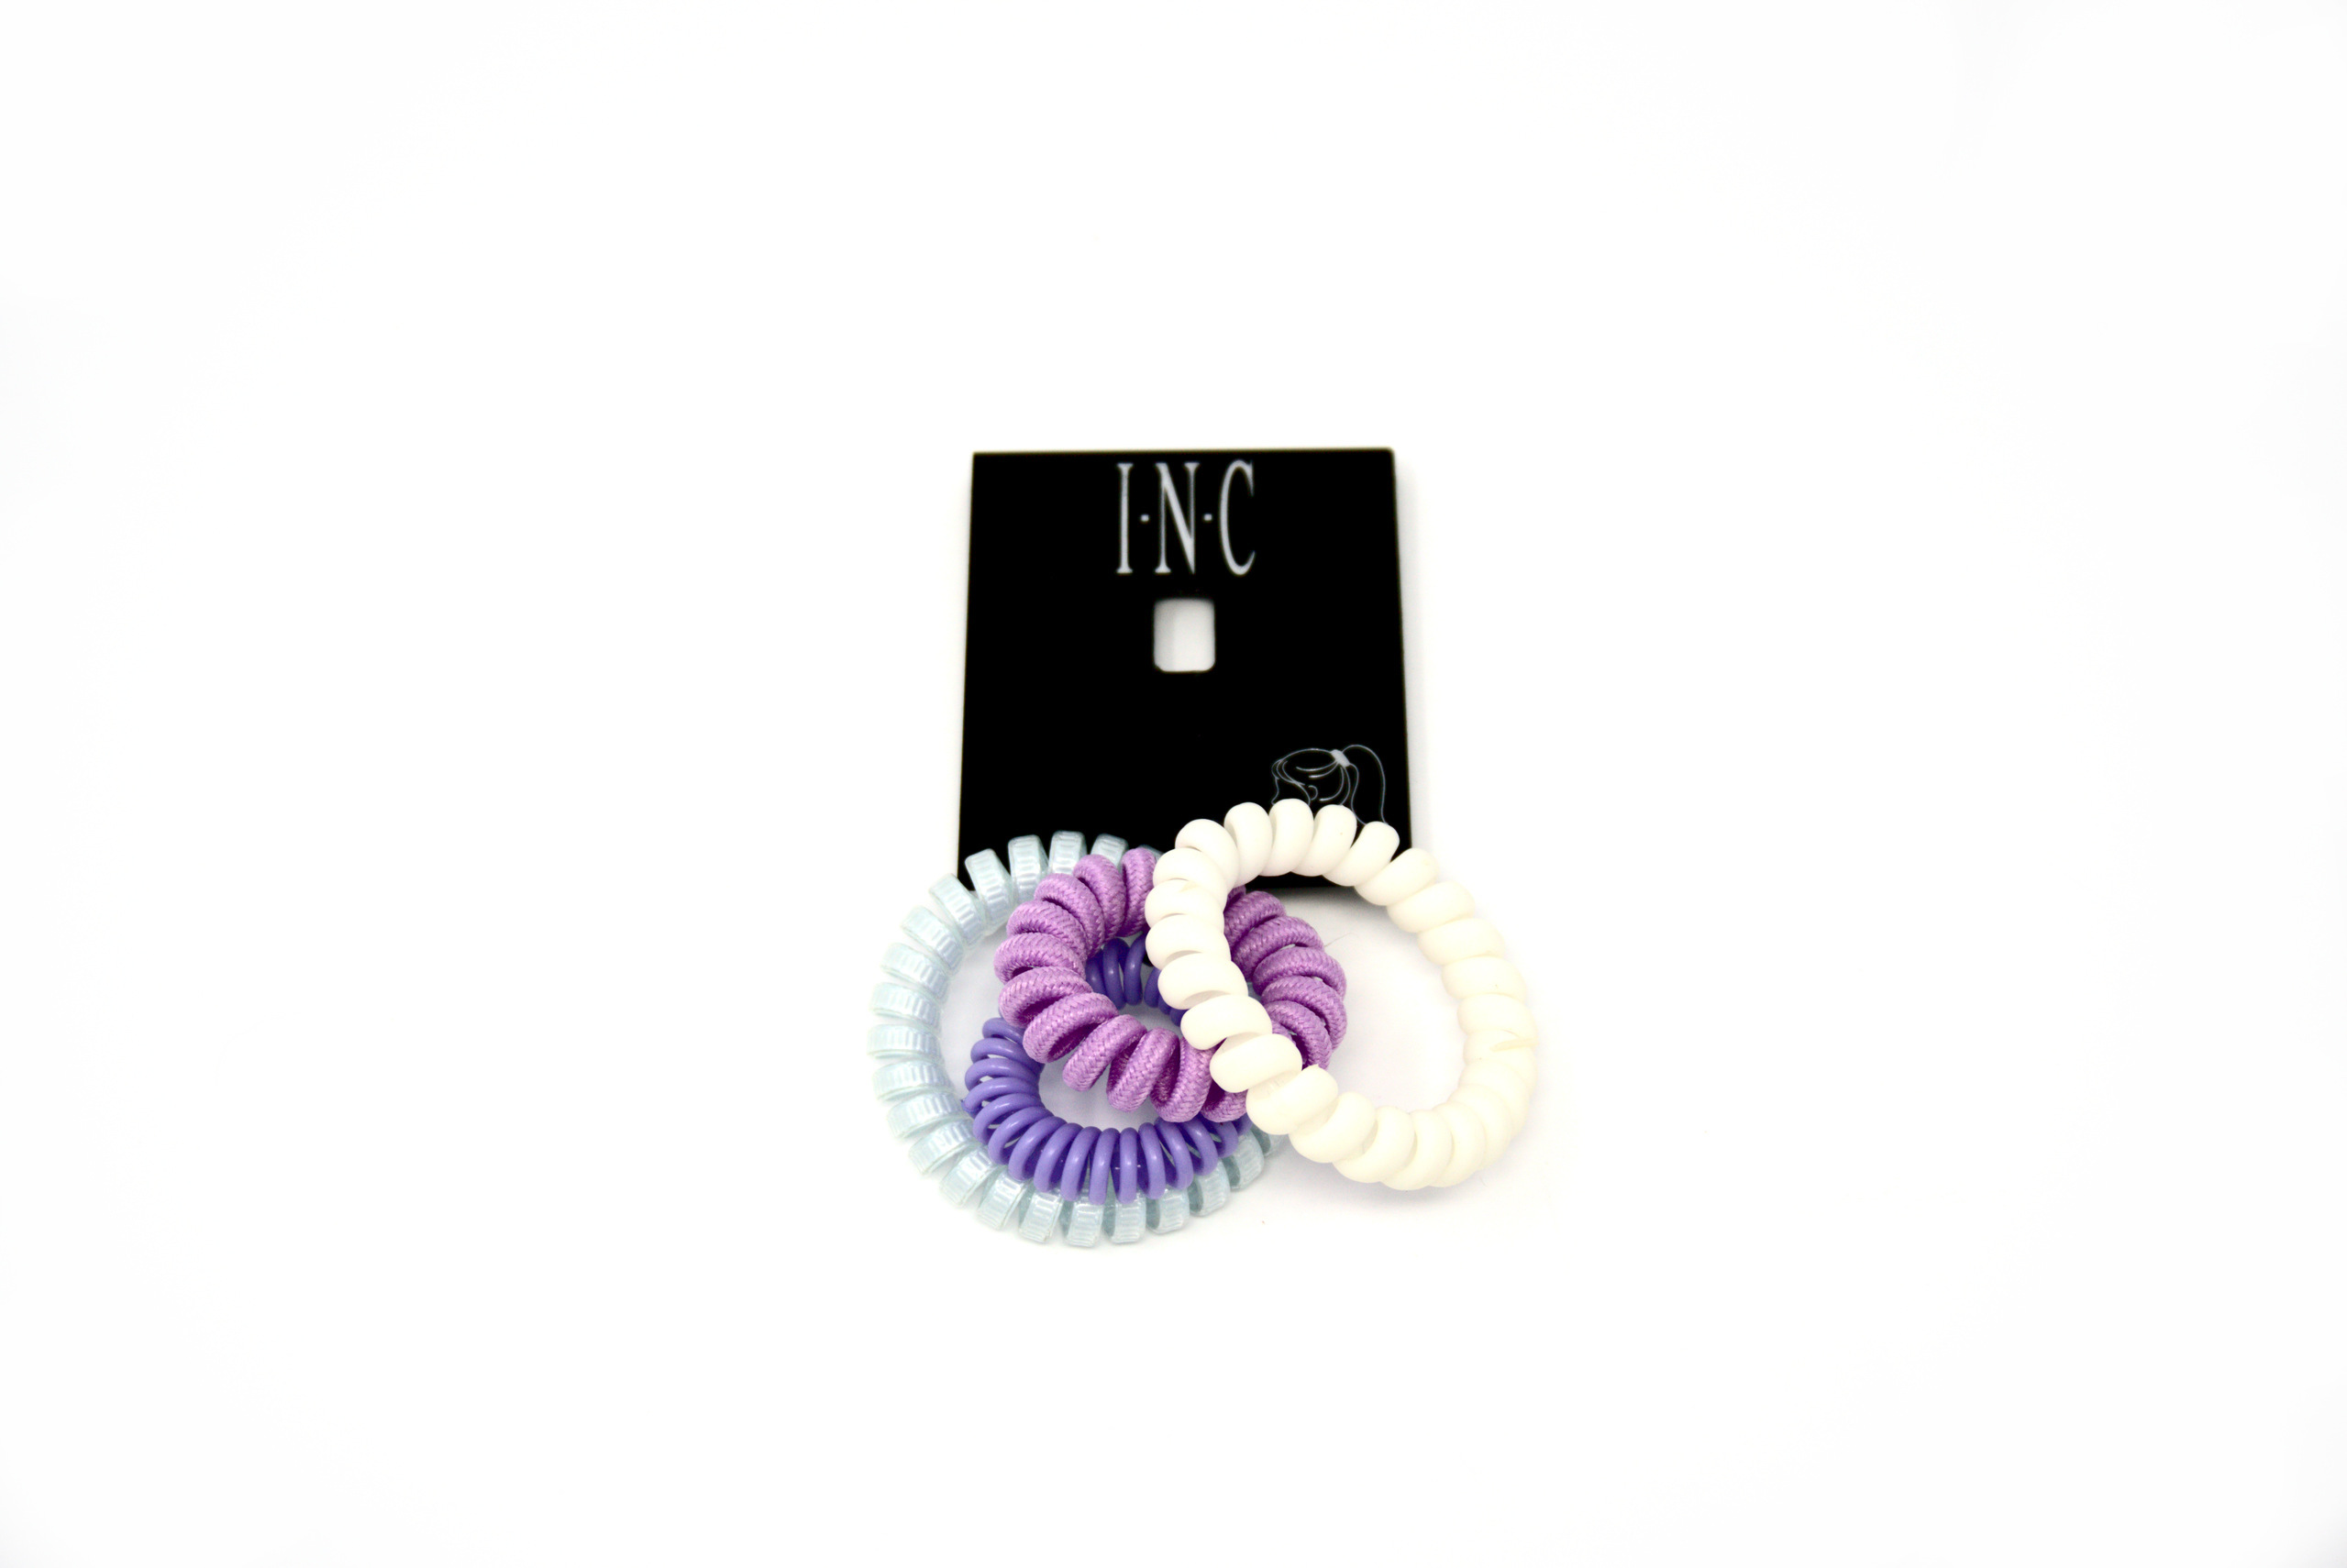 Chart & Lovely Quality Fashion Accessories present INC 4 pc. Mixed Spiral Hair Tie.